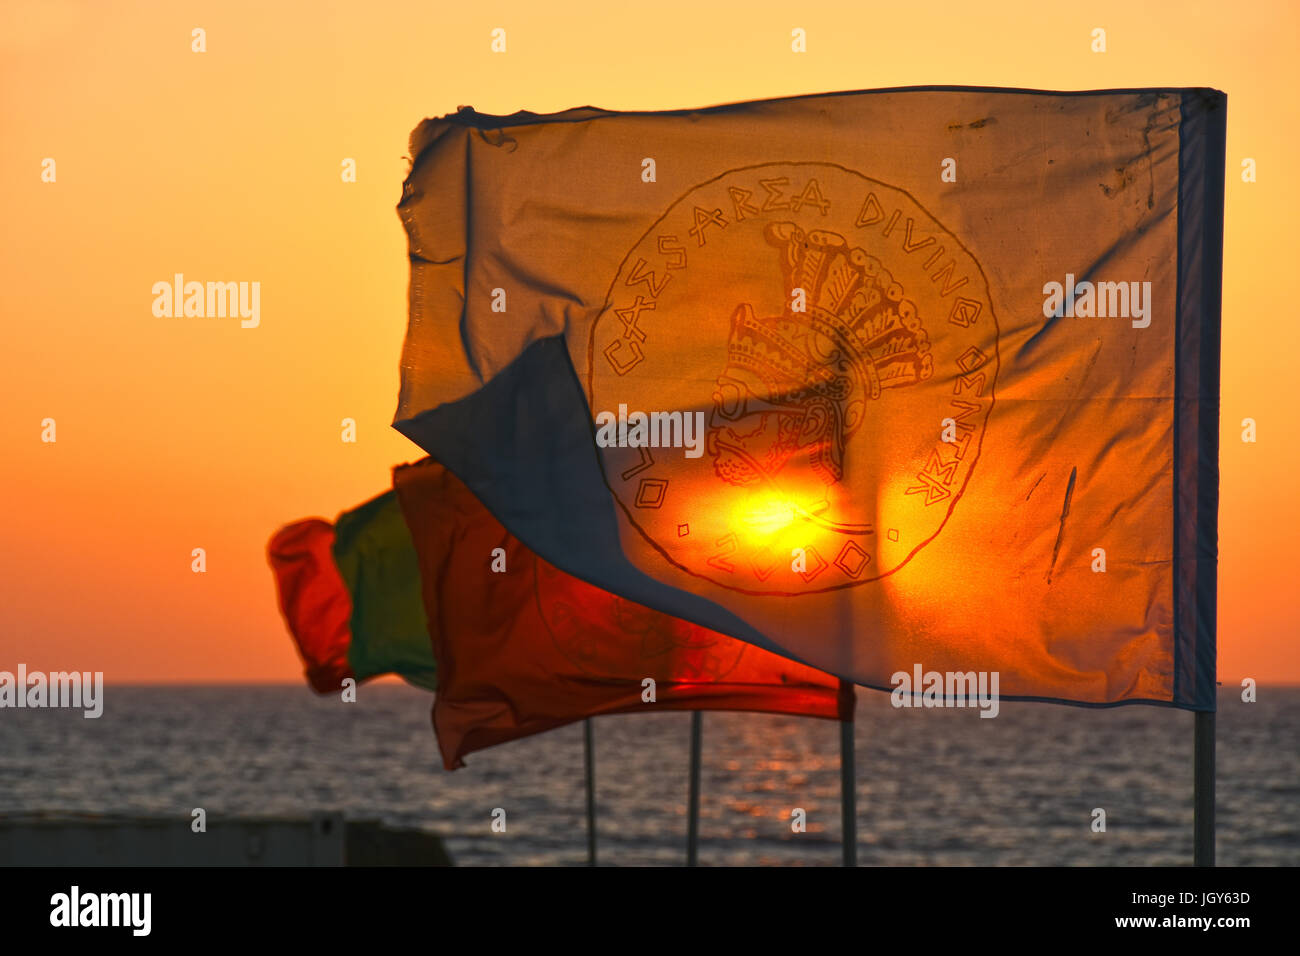 Ceasaria archaeological site flags, Israel Stock Photo